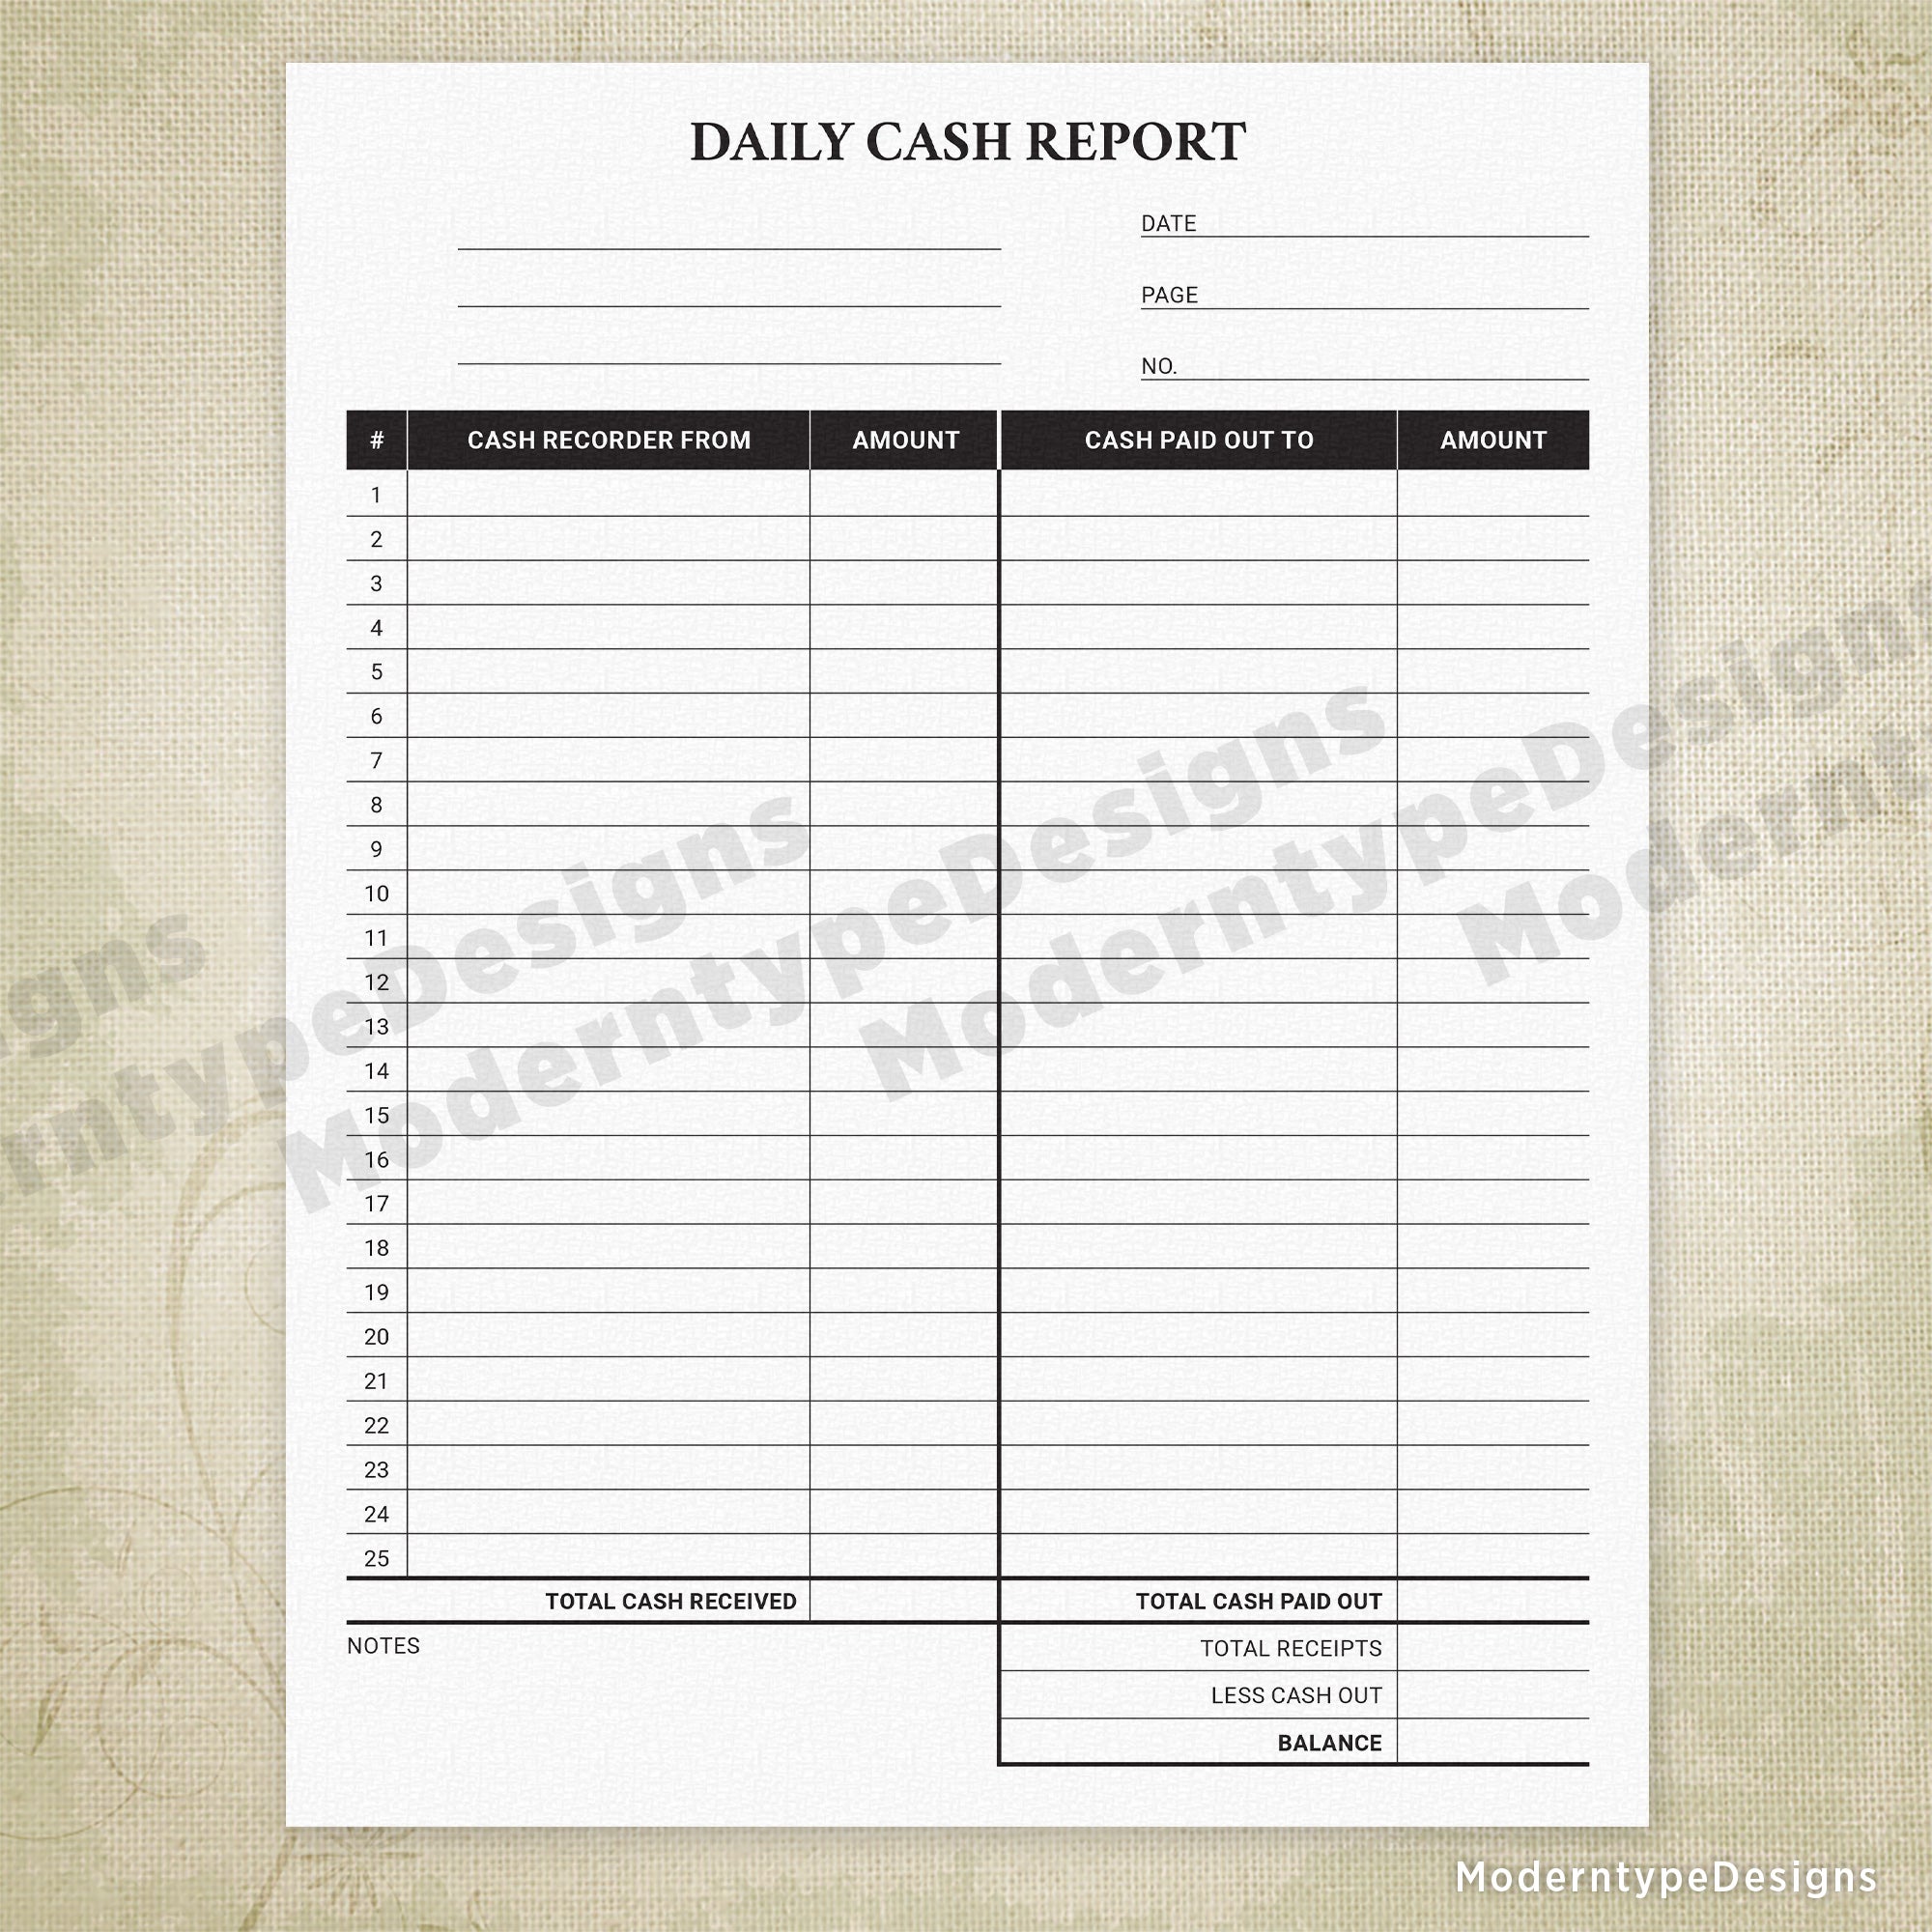 Daily Cash Report Printable Form